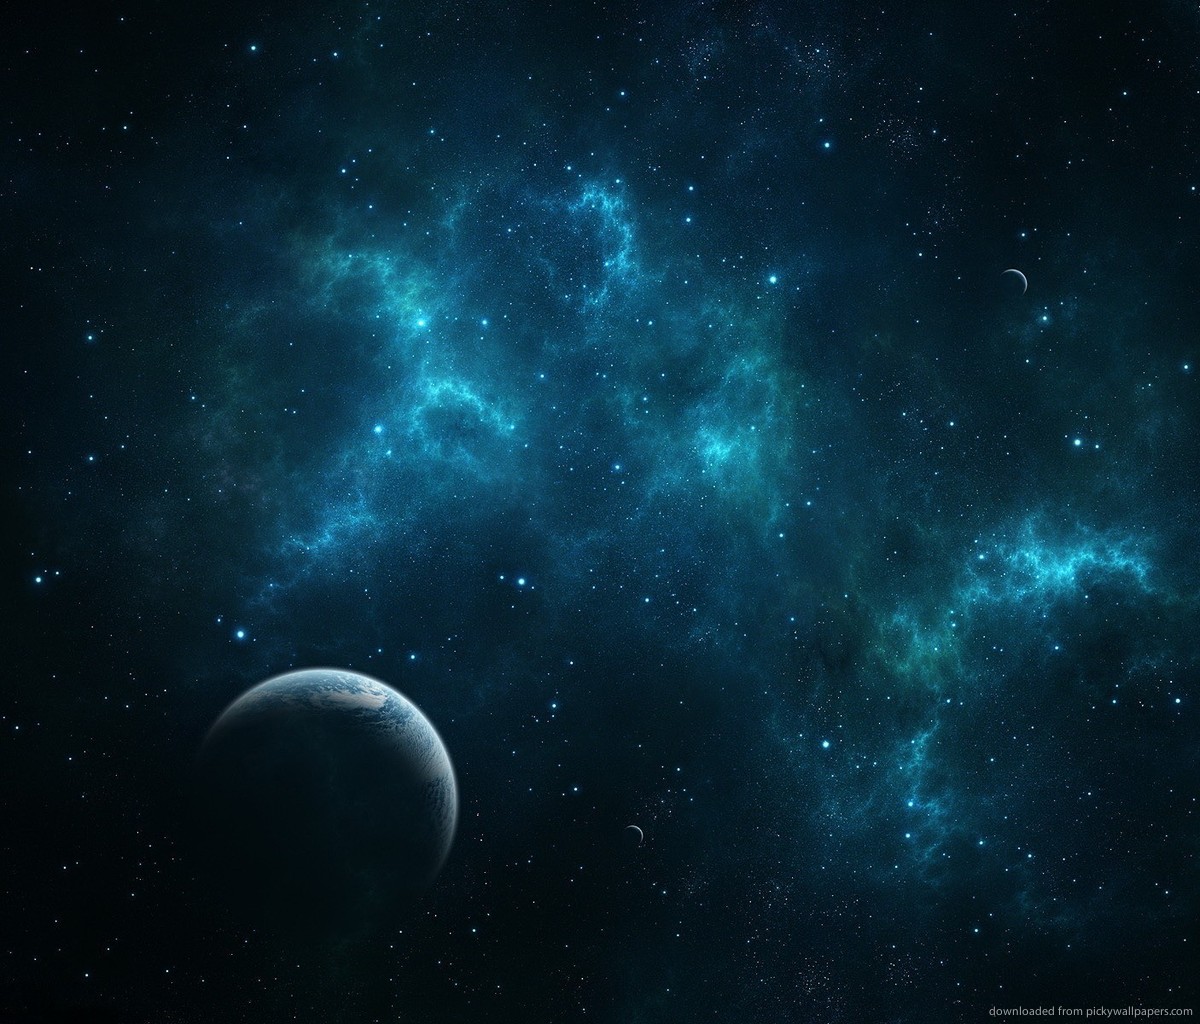 Blue Space Galaxy Wallpaper - Pics about space